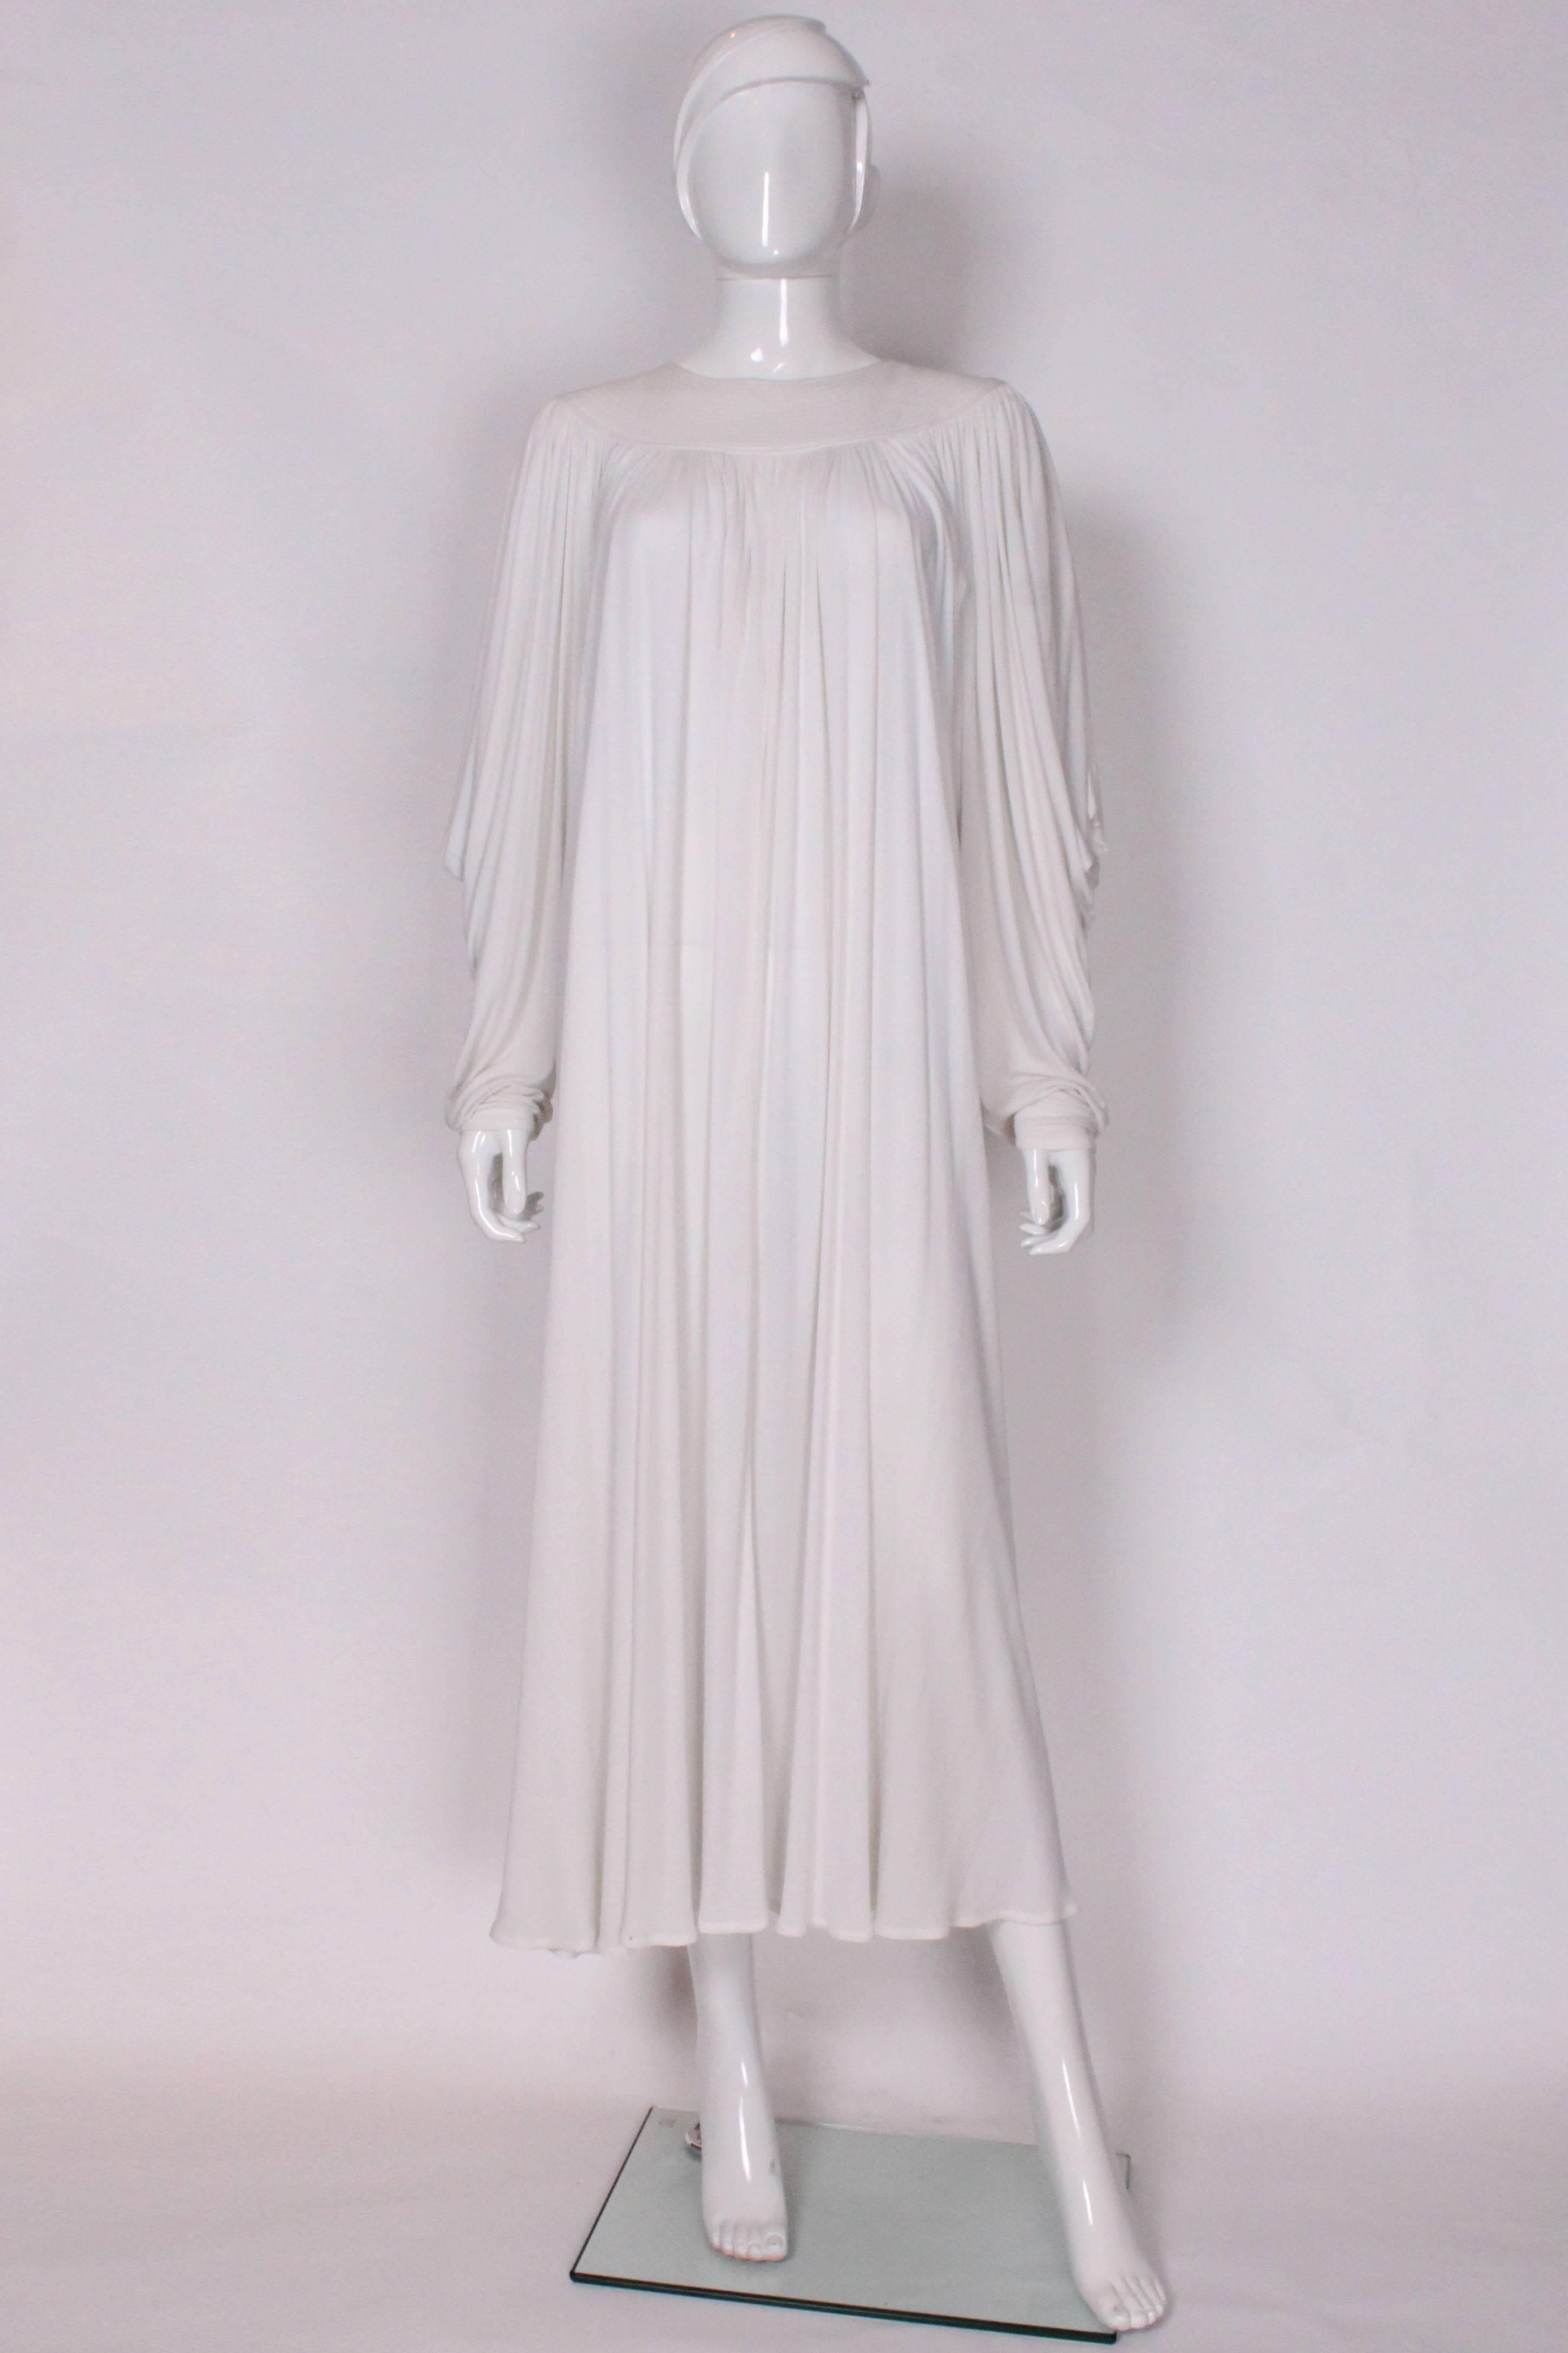 A lovely gown by Gryuki Torimaru under his Yuki London label. The gown is in a white jersey material with a round neckline with rows of stitching on the front and back. The dress opens at the back with 8 buttons and then a sexy keyhole opening. The